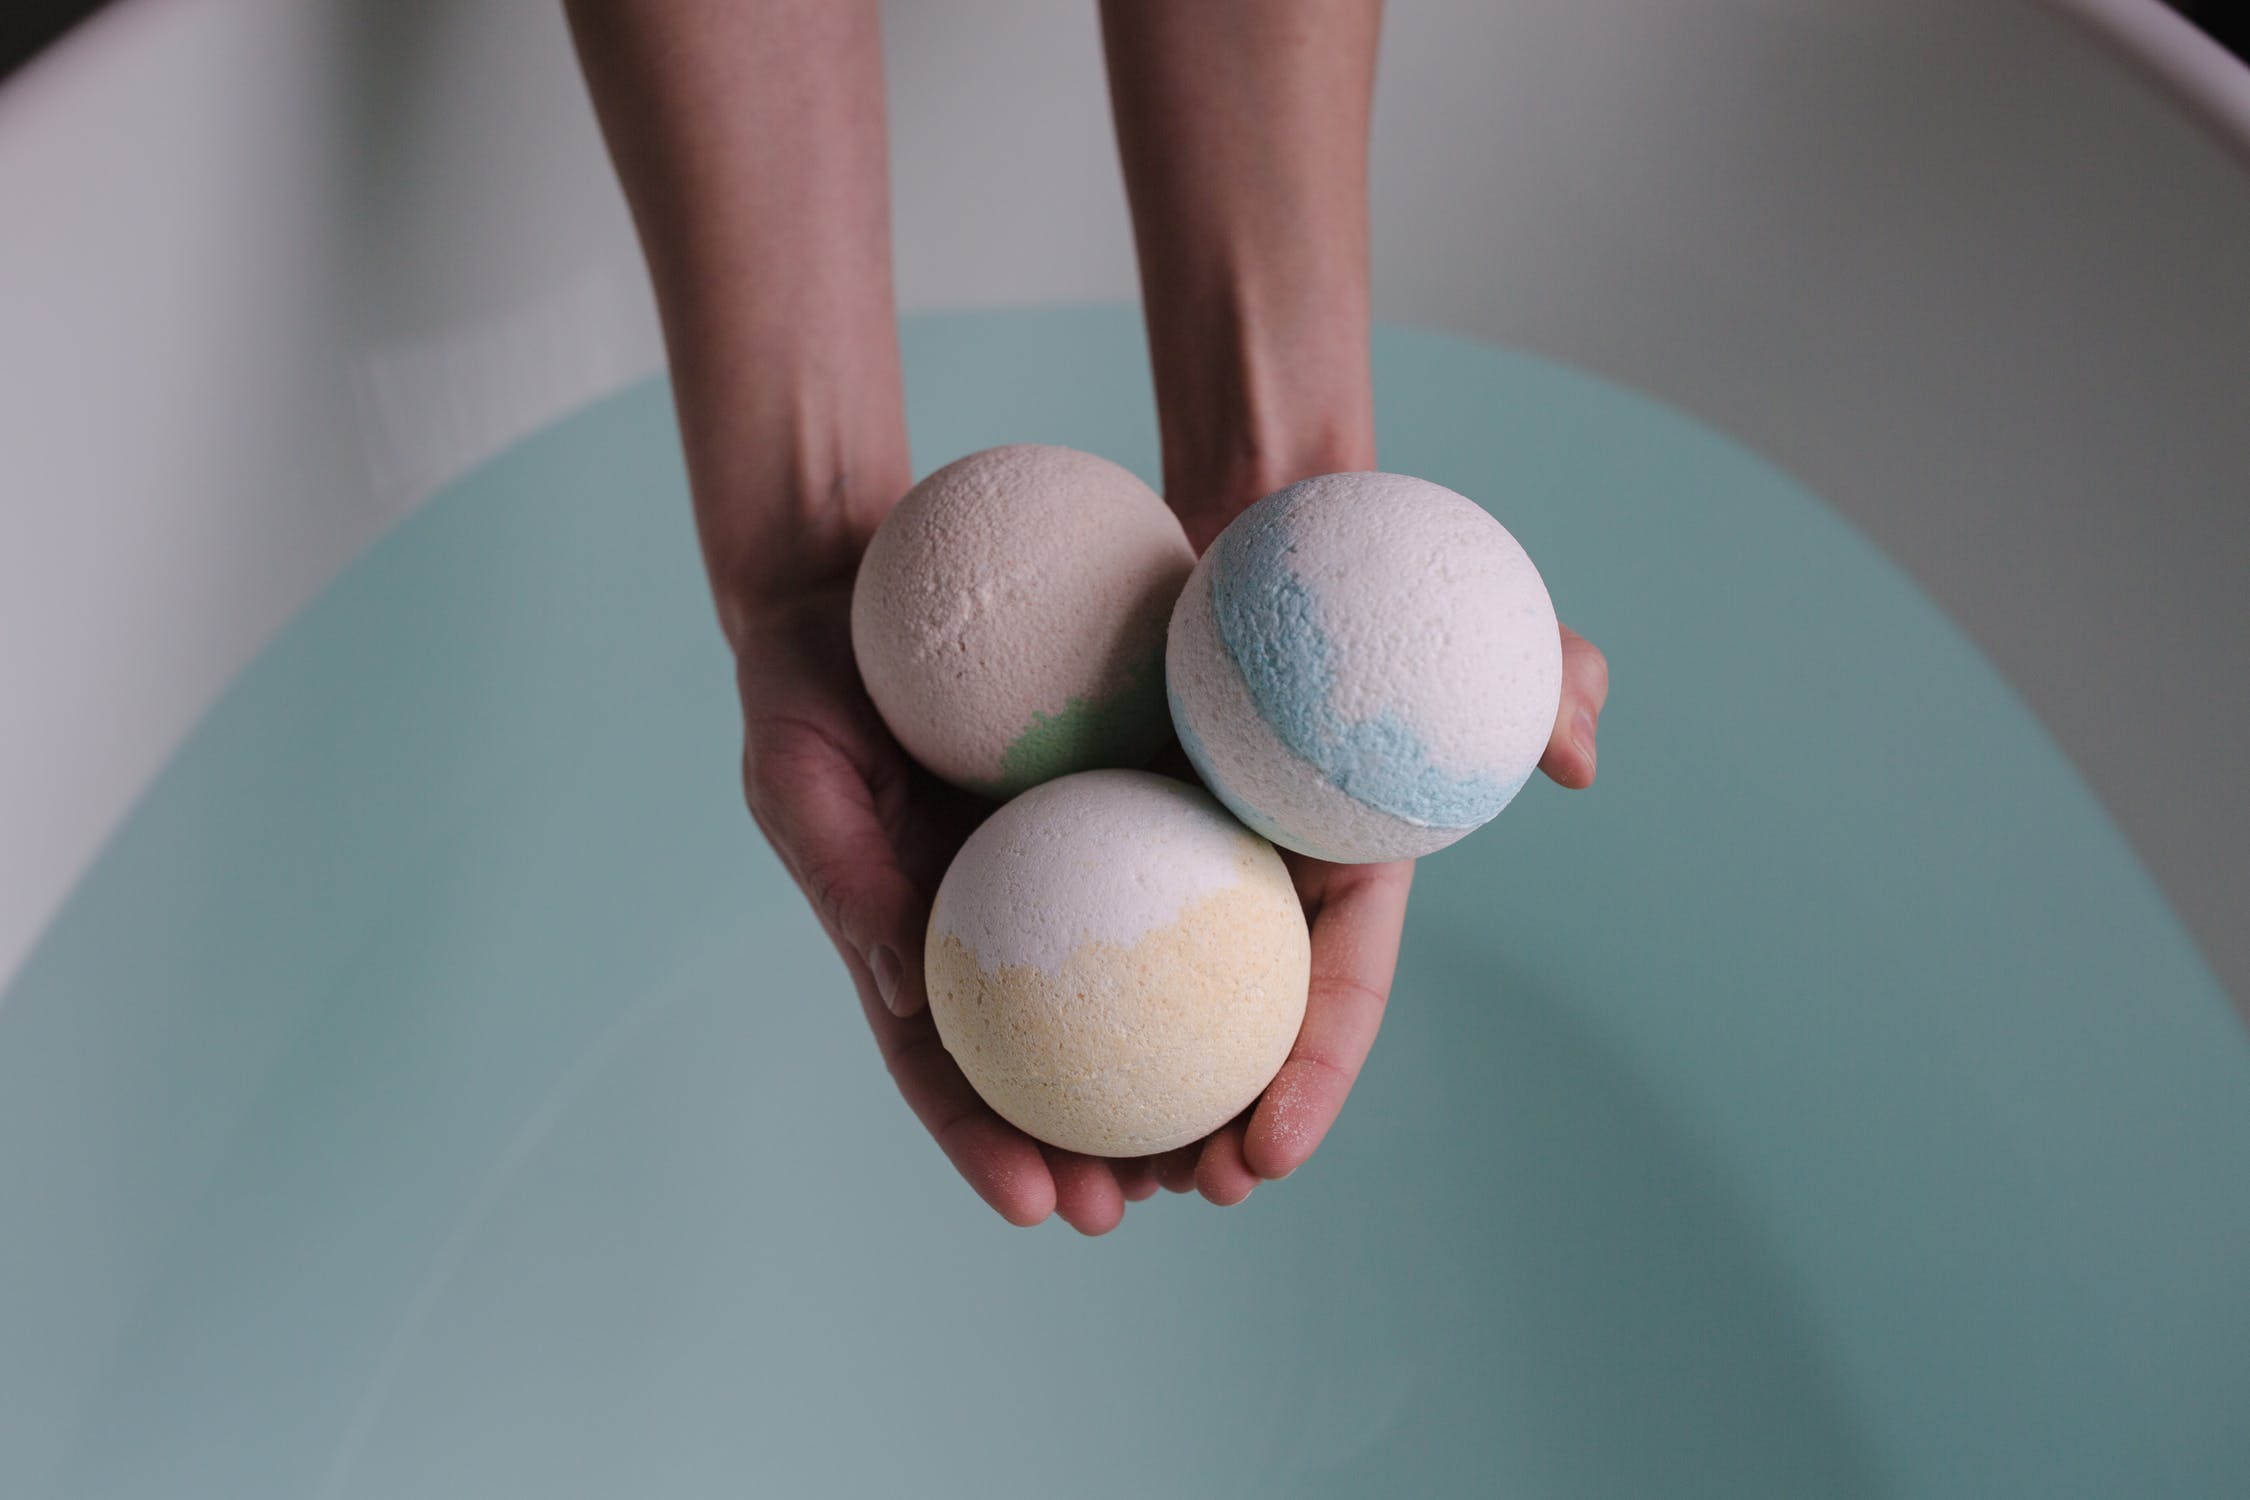 How to make your own bath bombs